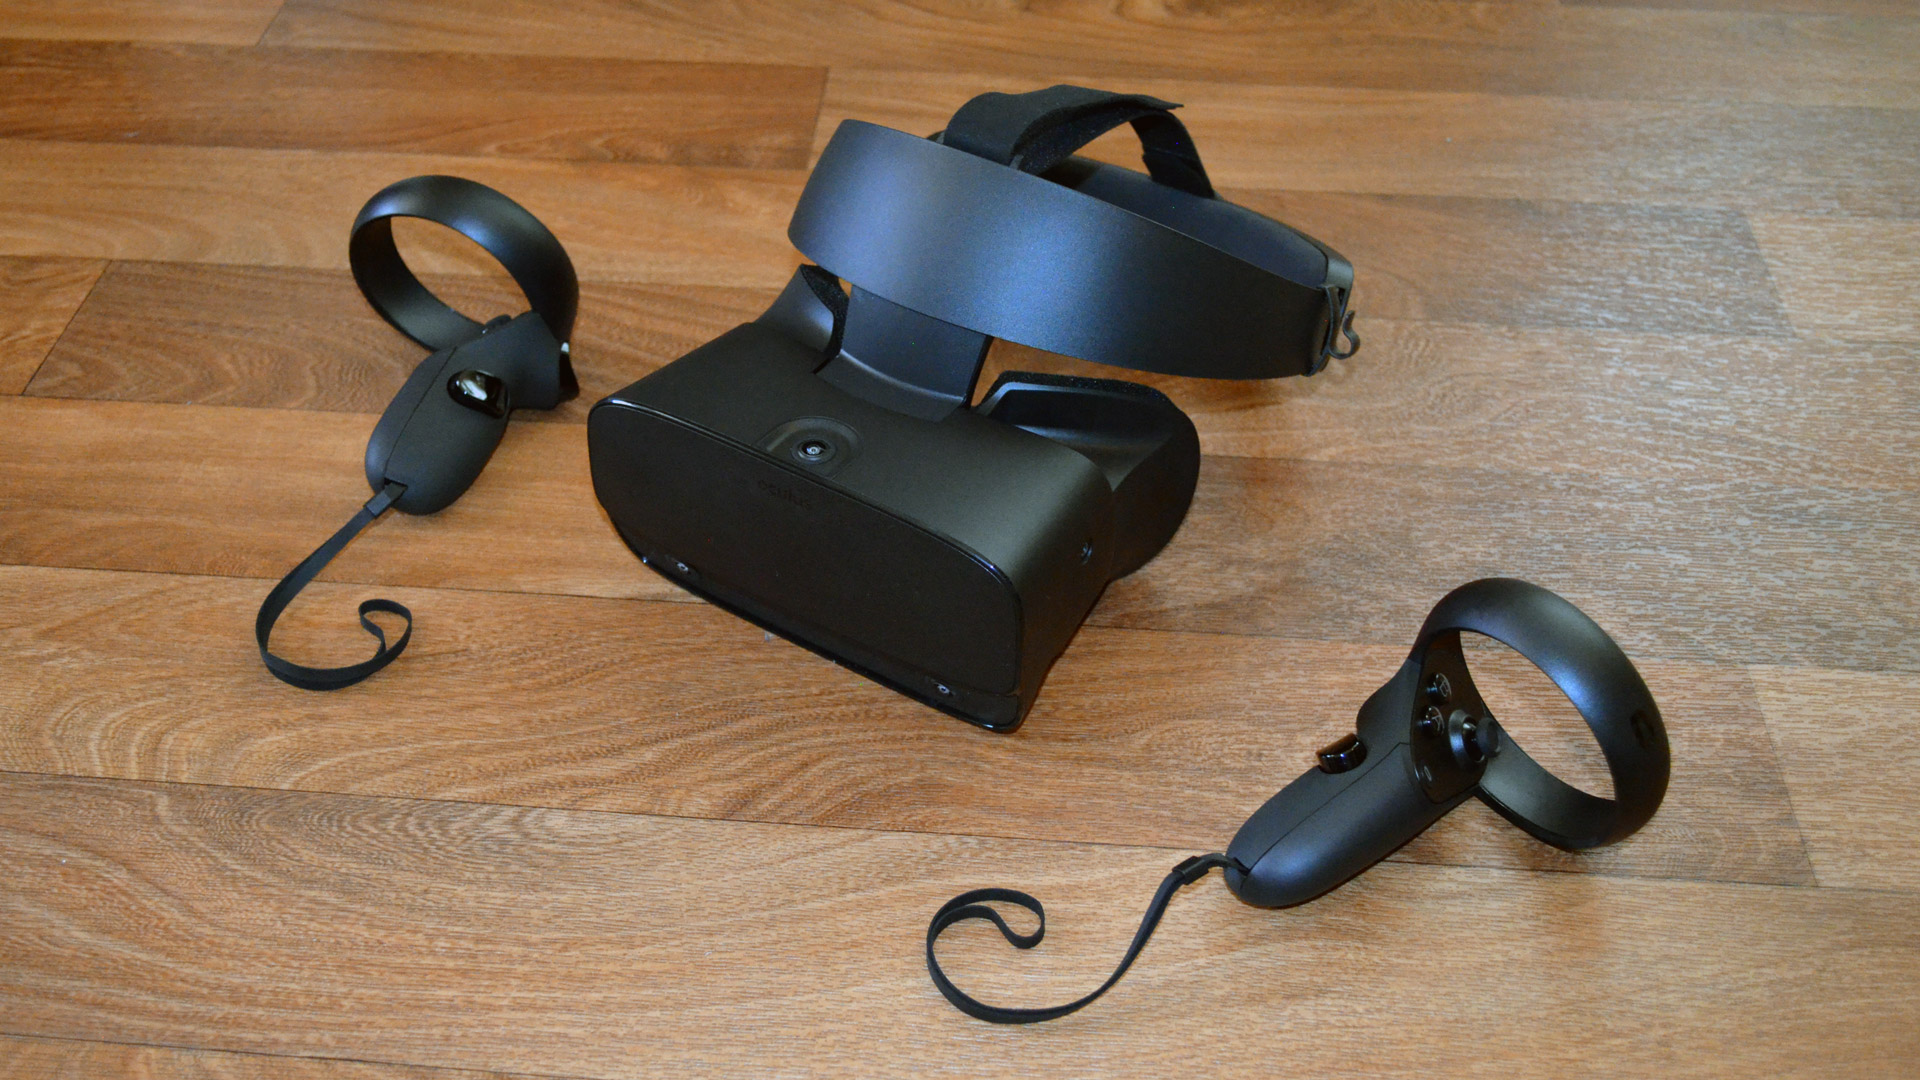 does the oculus rift s work with steam